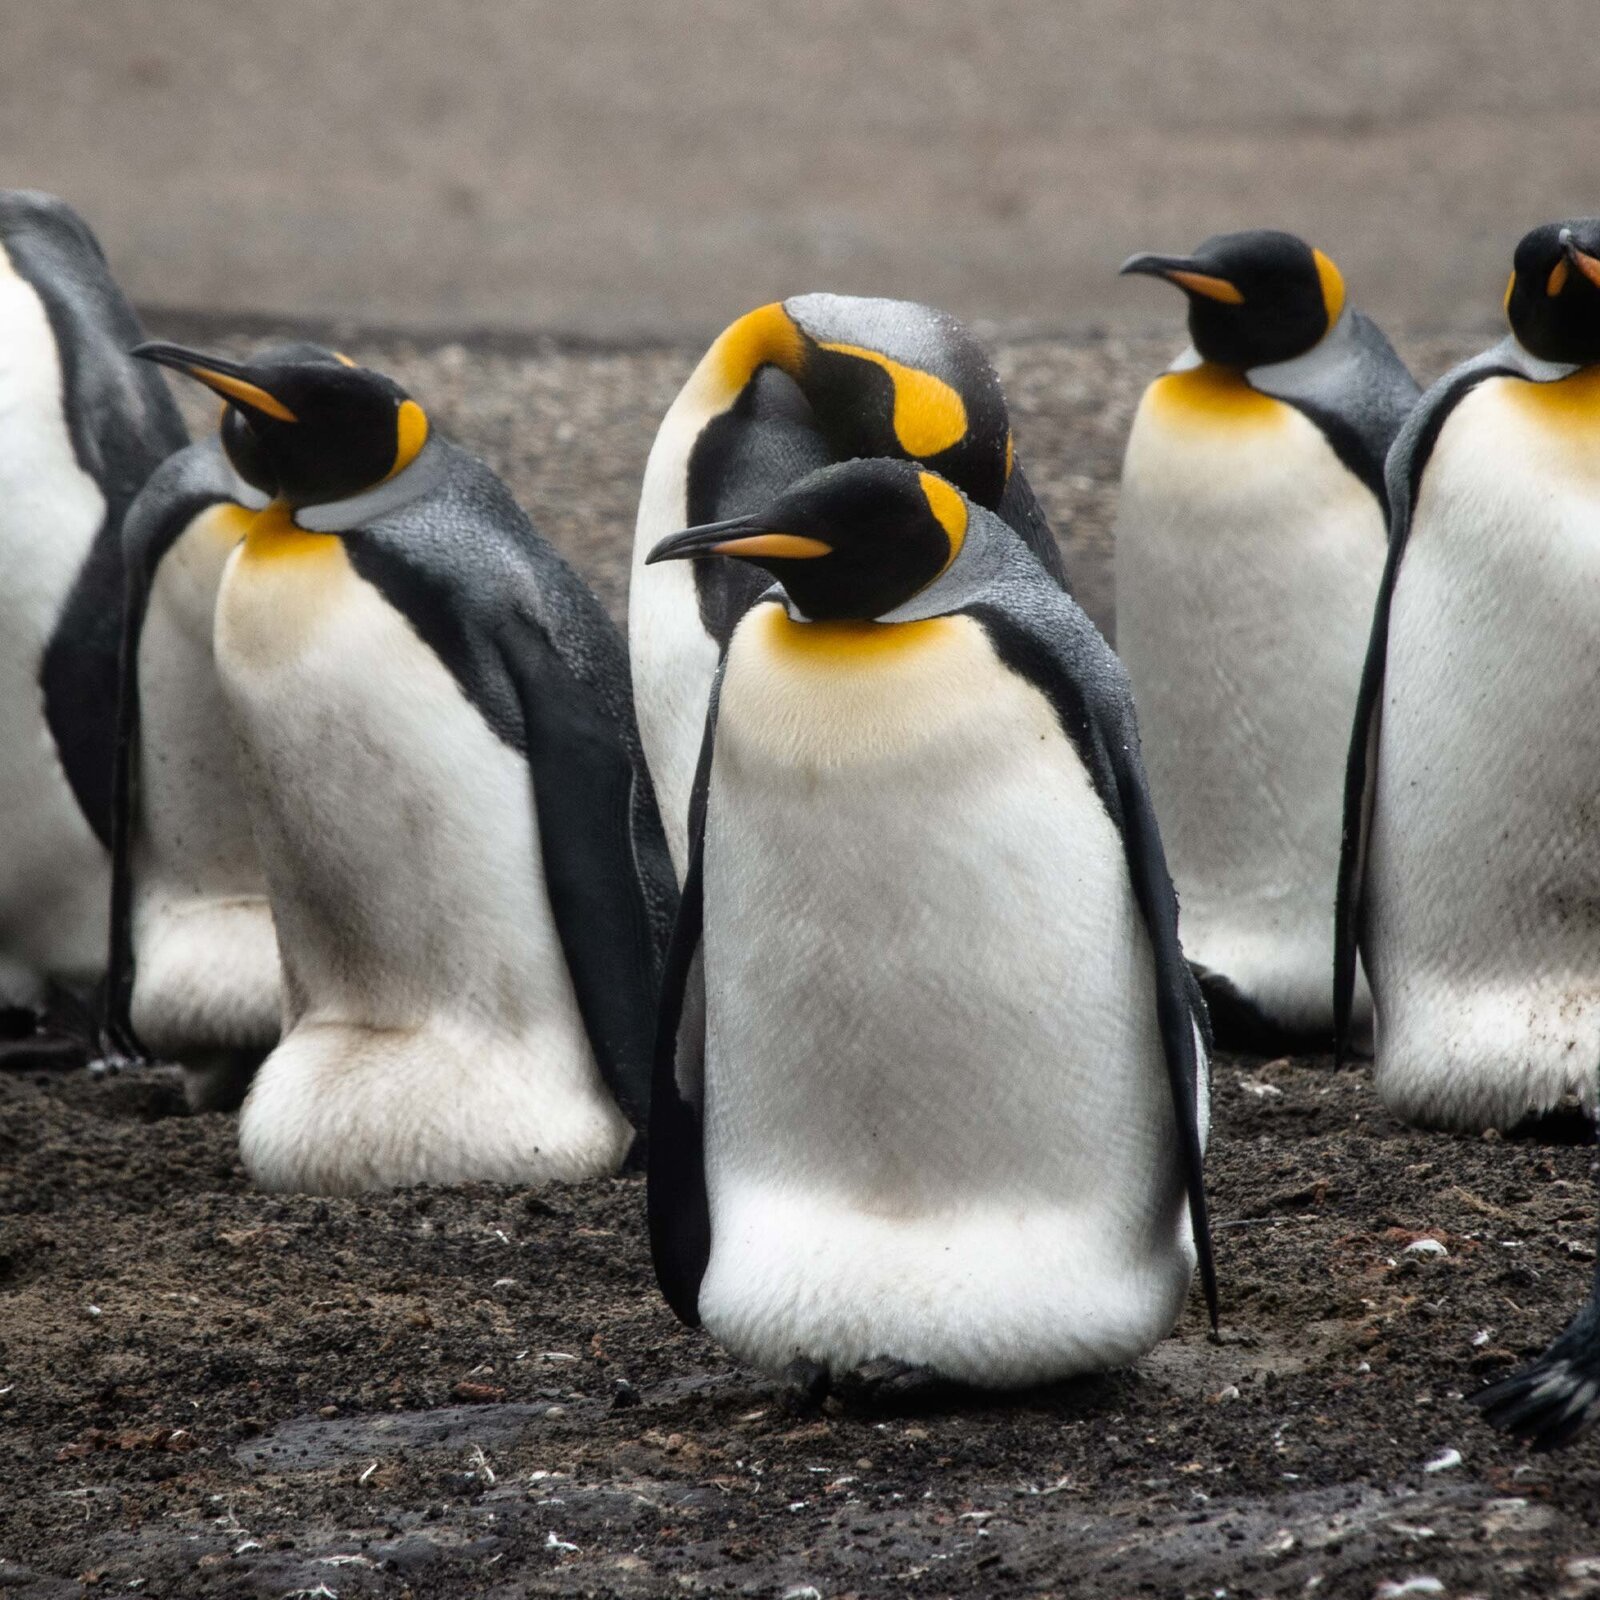 Townsend Majors' photograph of King Penguins